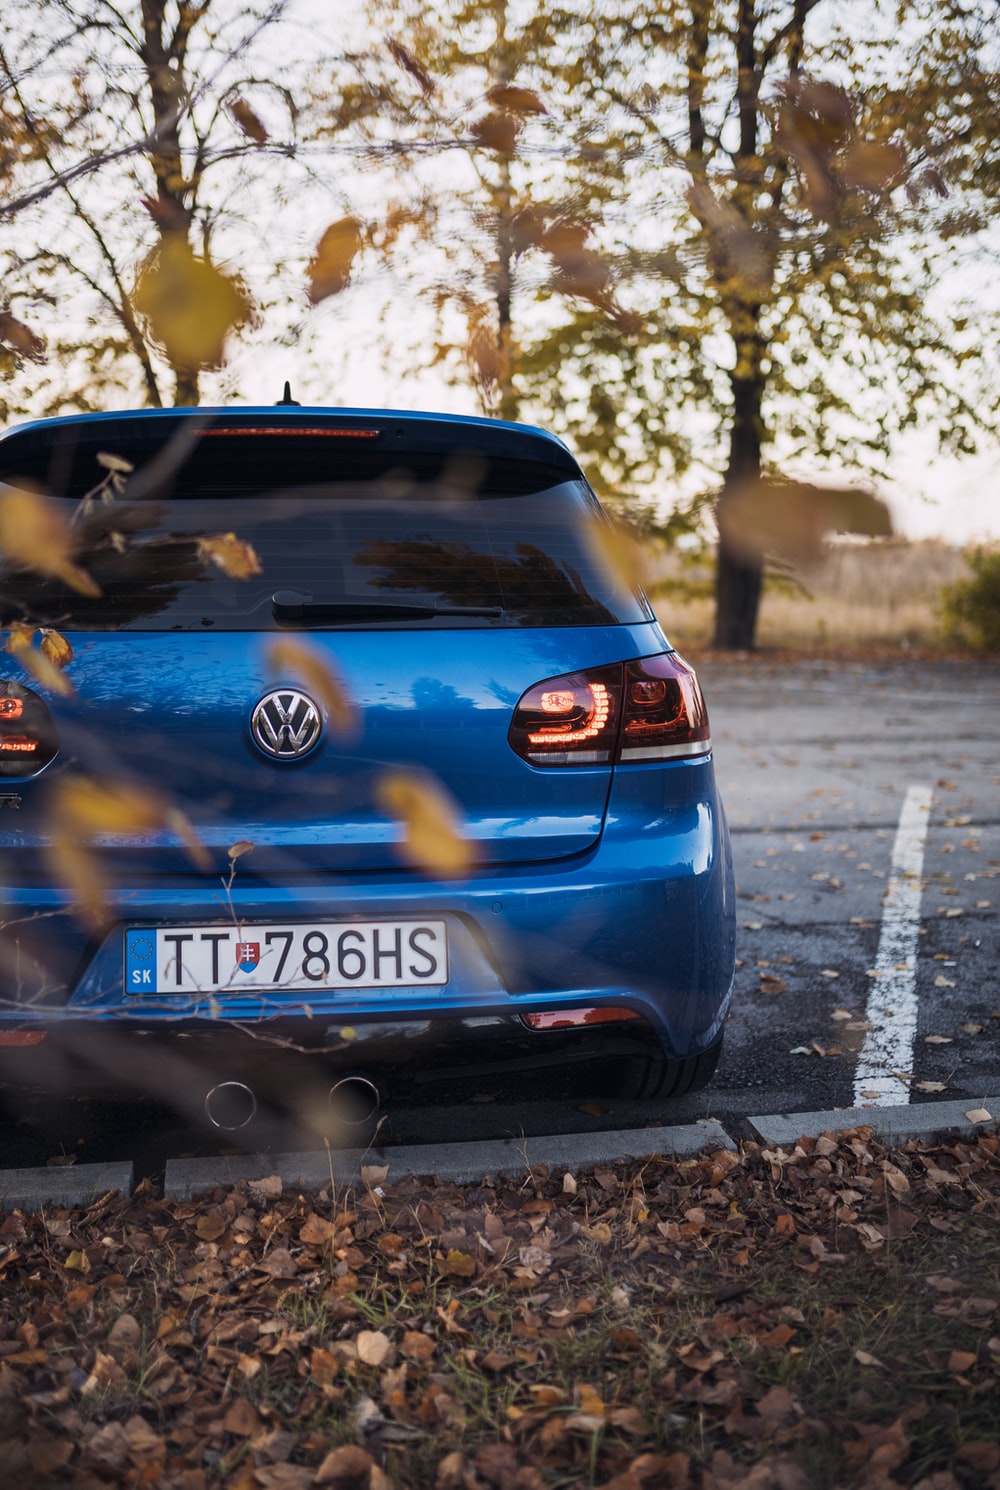 Vw Golf 6 Picture. Download Free Image